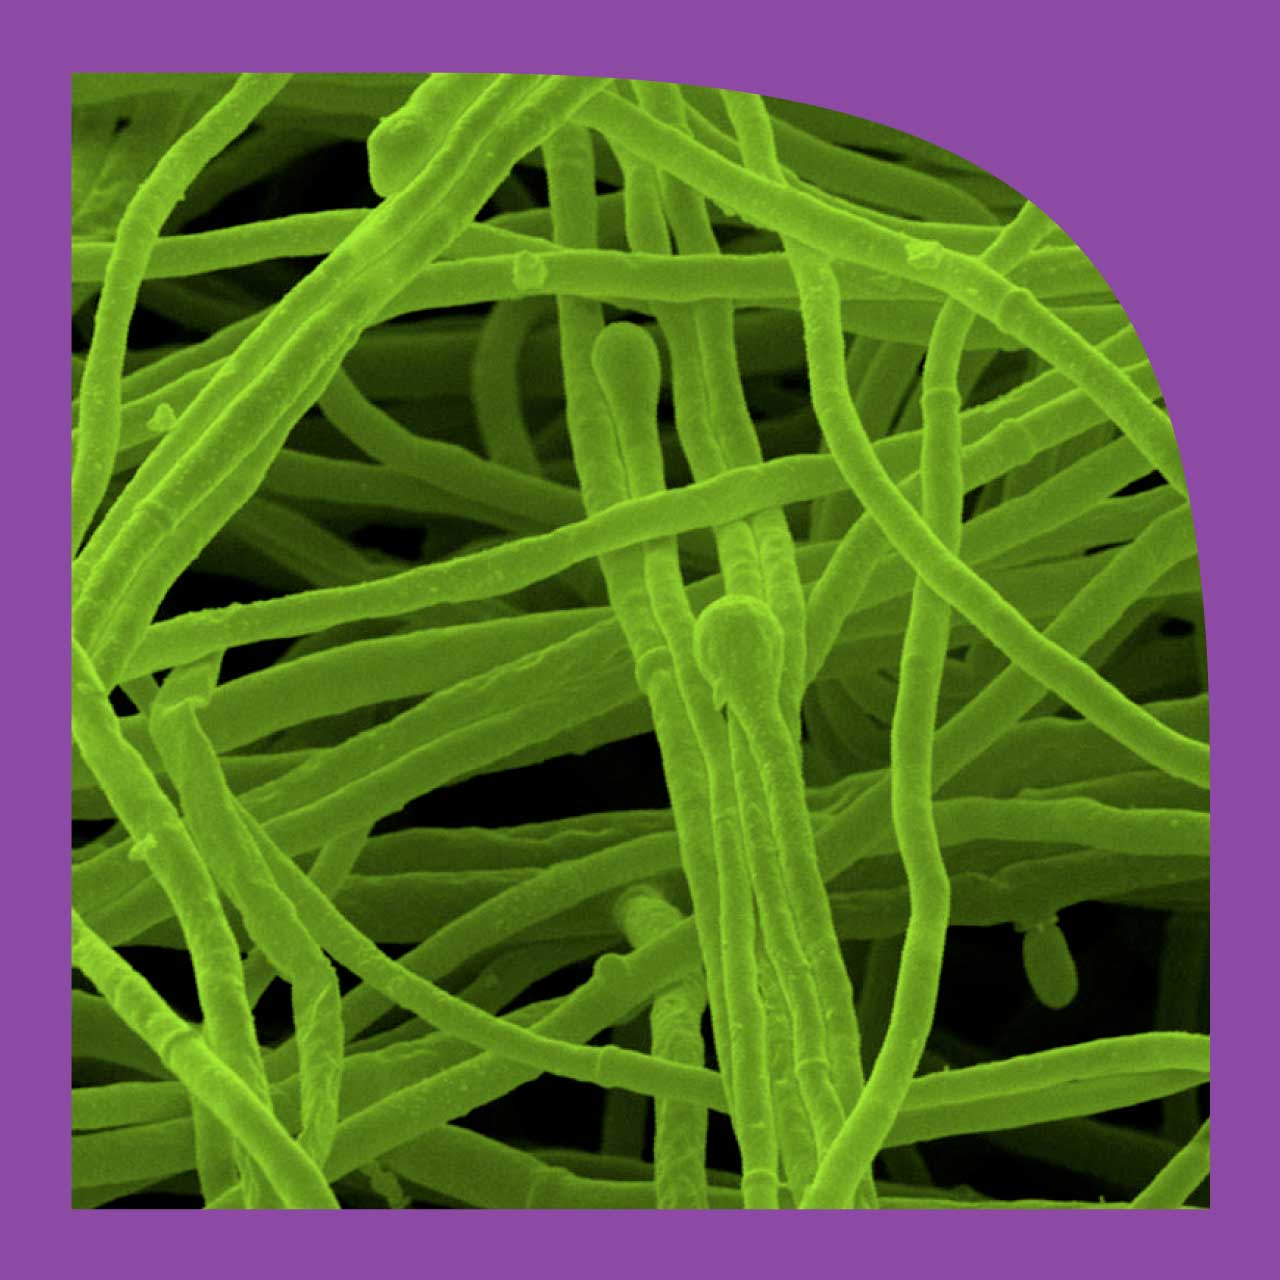 A microscopic view of the fungus used by Kuvu Bio Solutions designed by Hans Slade.